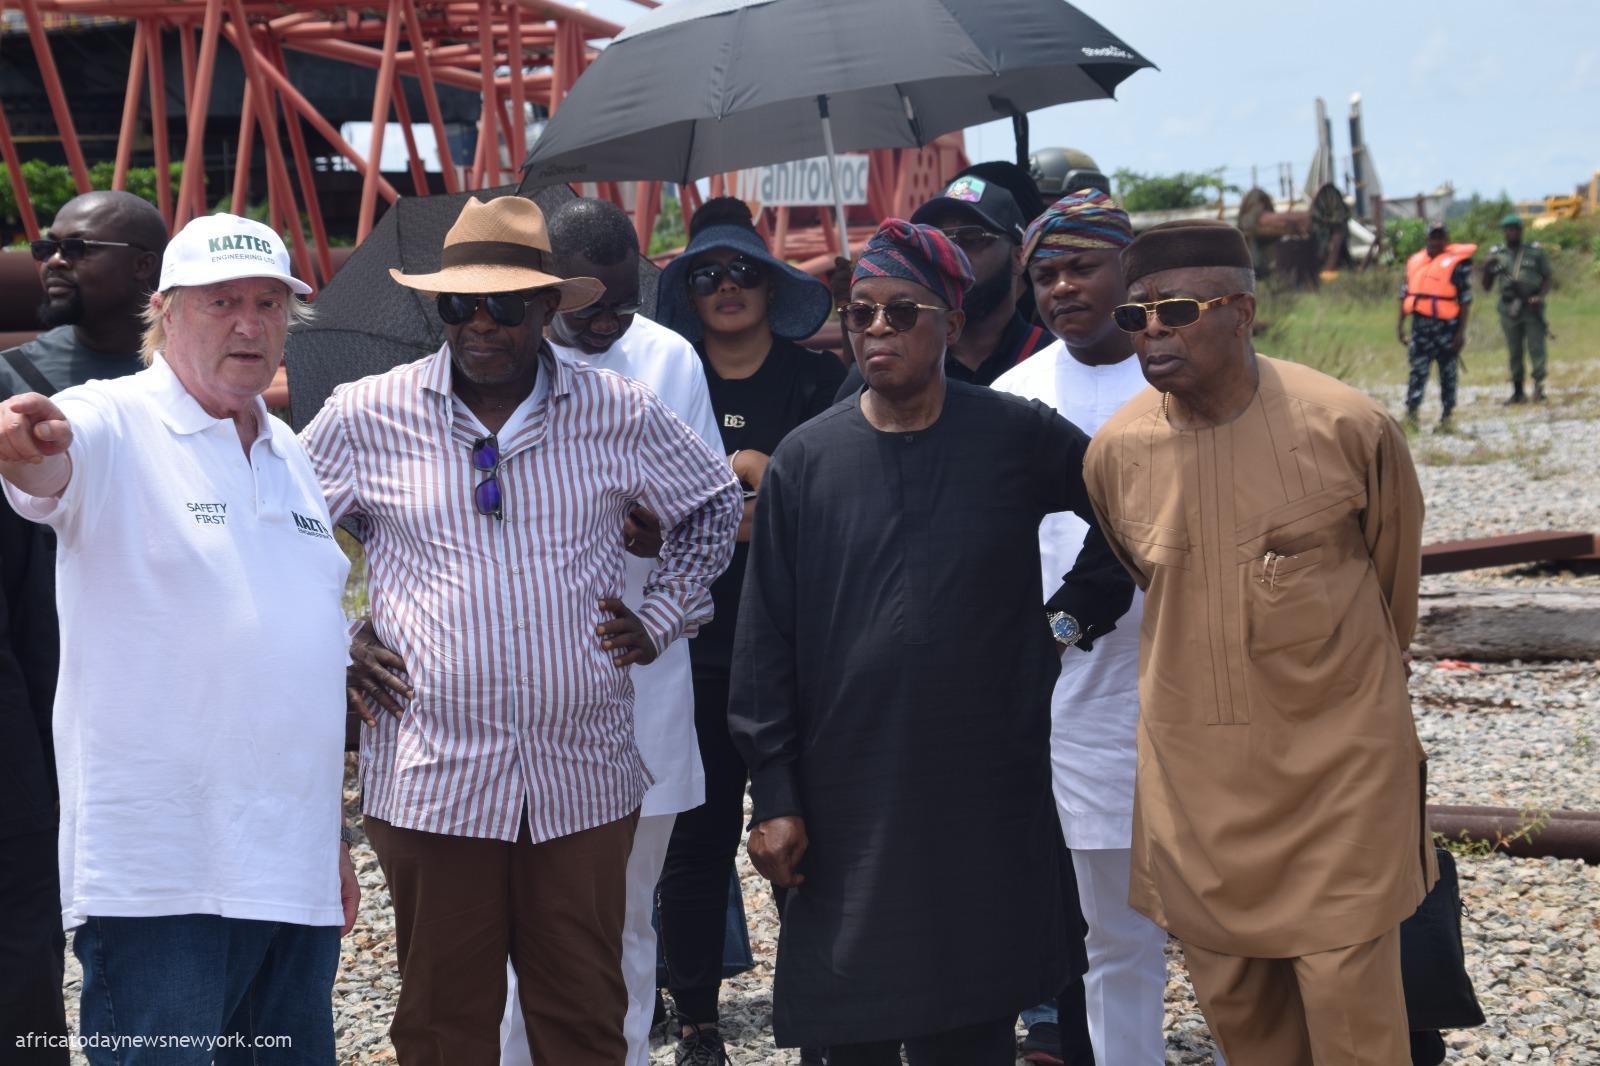 FG Pledges To Support Revival Of $1bn Kaztec Fabrication Yard